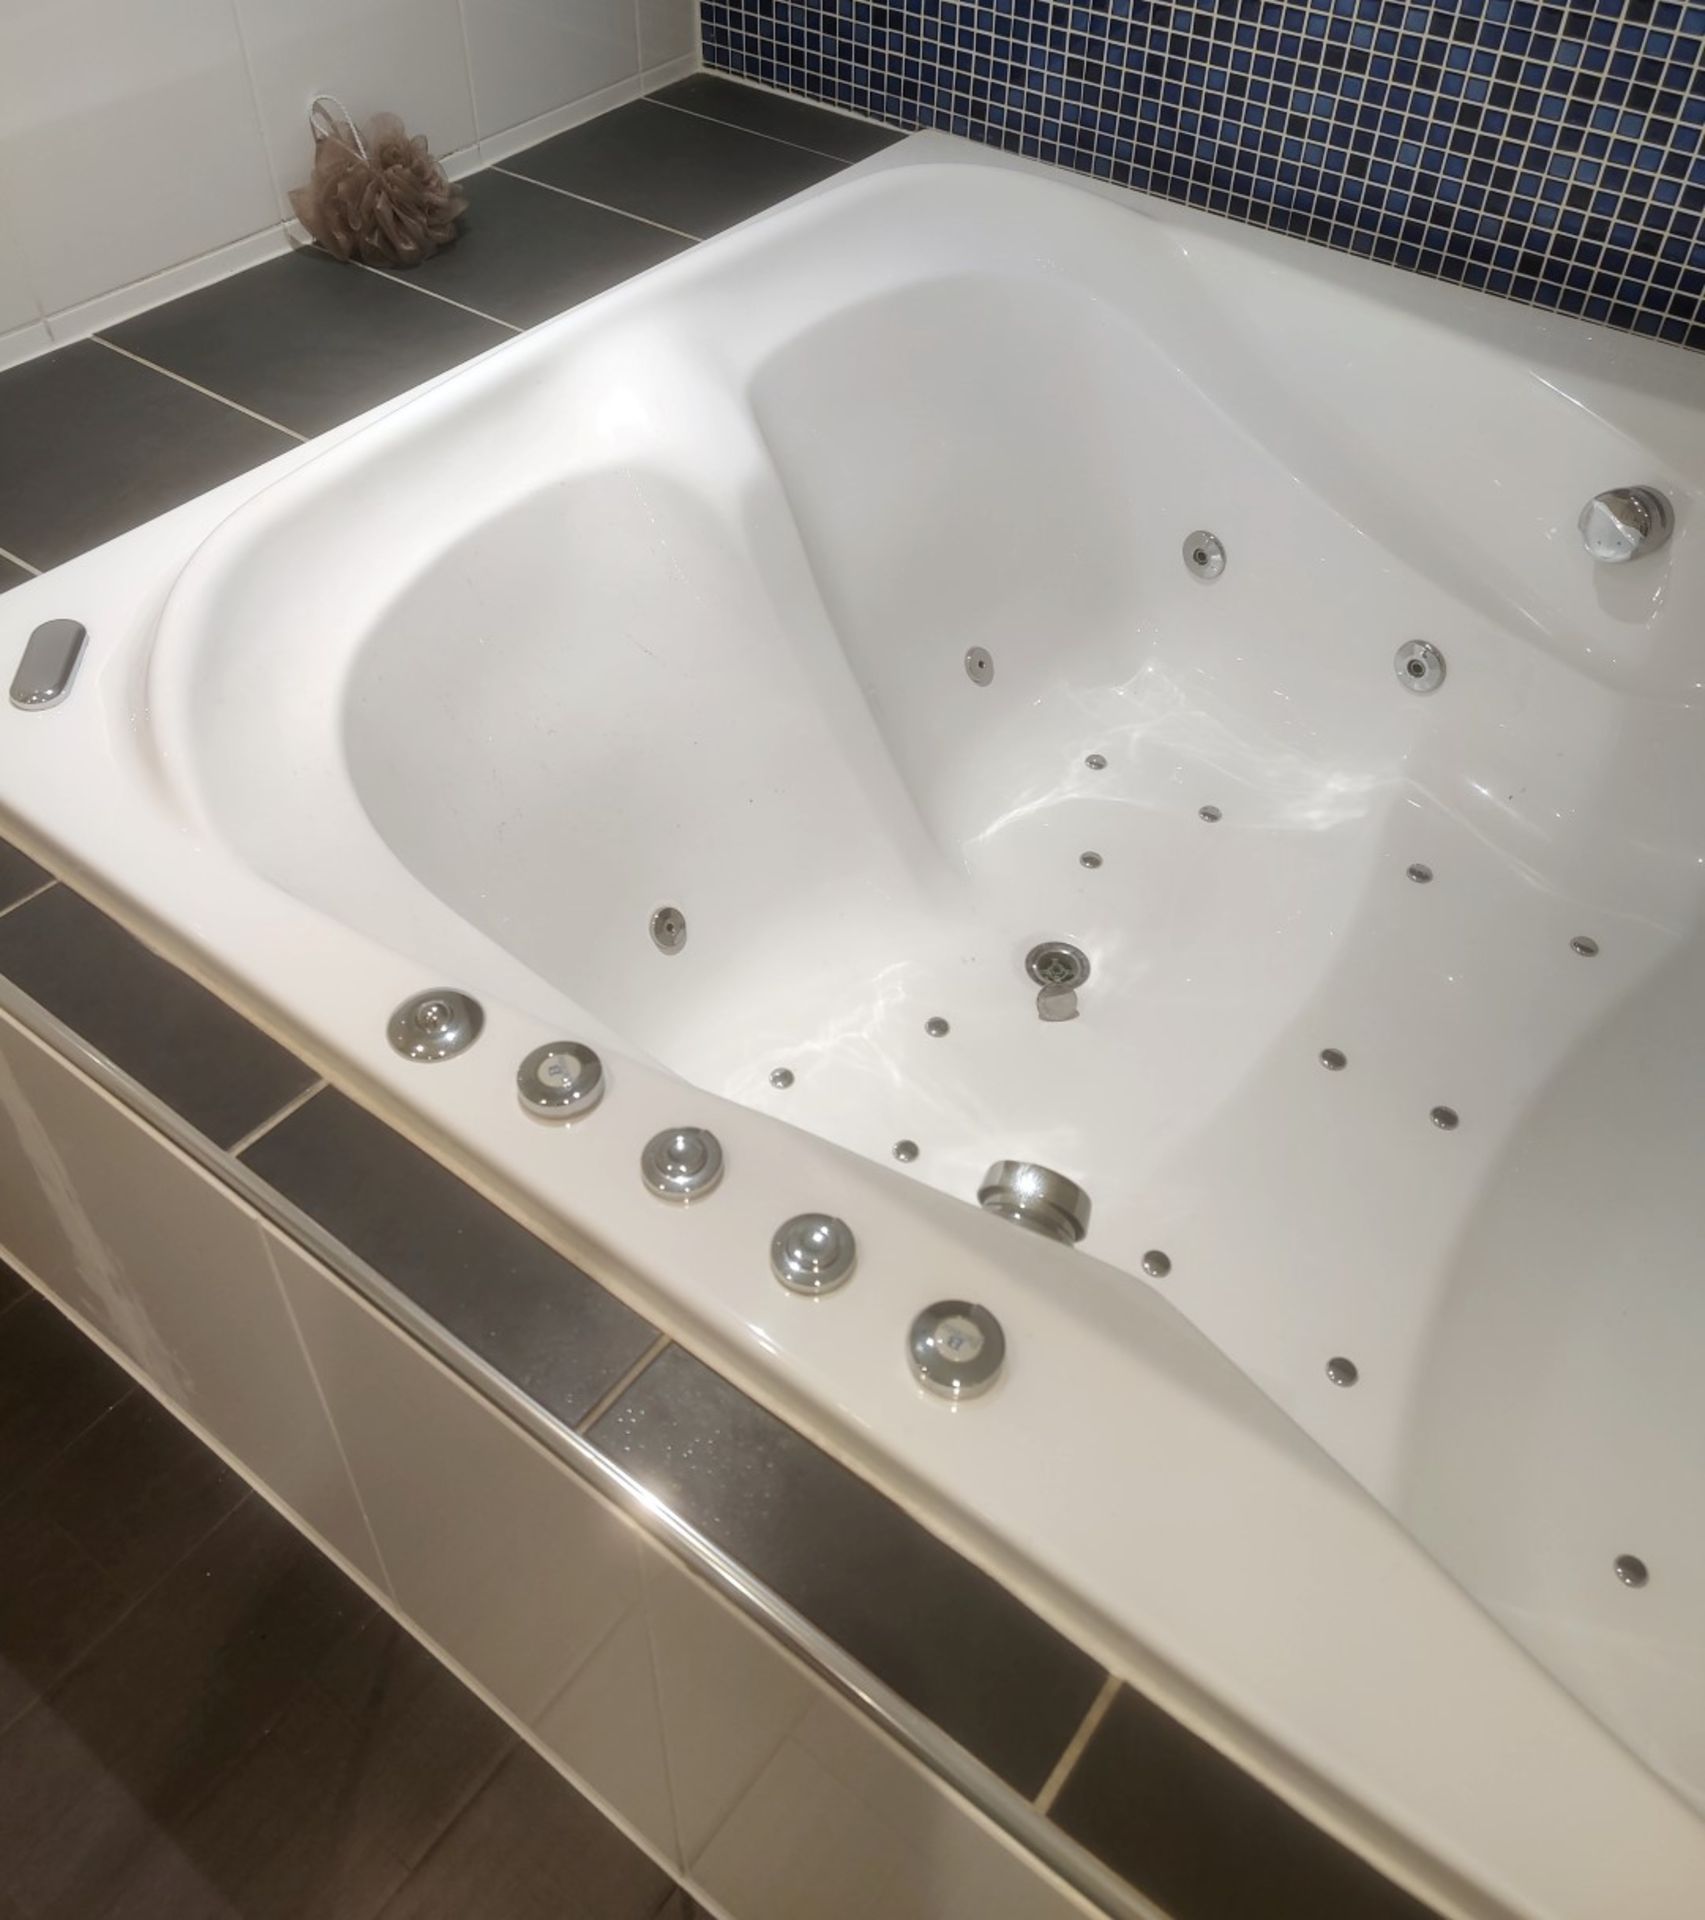 1 x Bronte Jacuzzi Whirlpool Bath - Approx 6.5ft x 5ft Size - Includes Brassware, Water Jets & Pump - Image 9 of 15